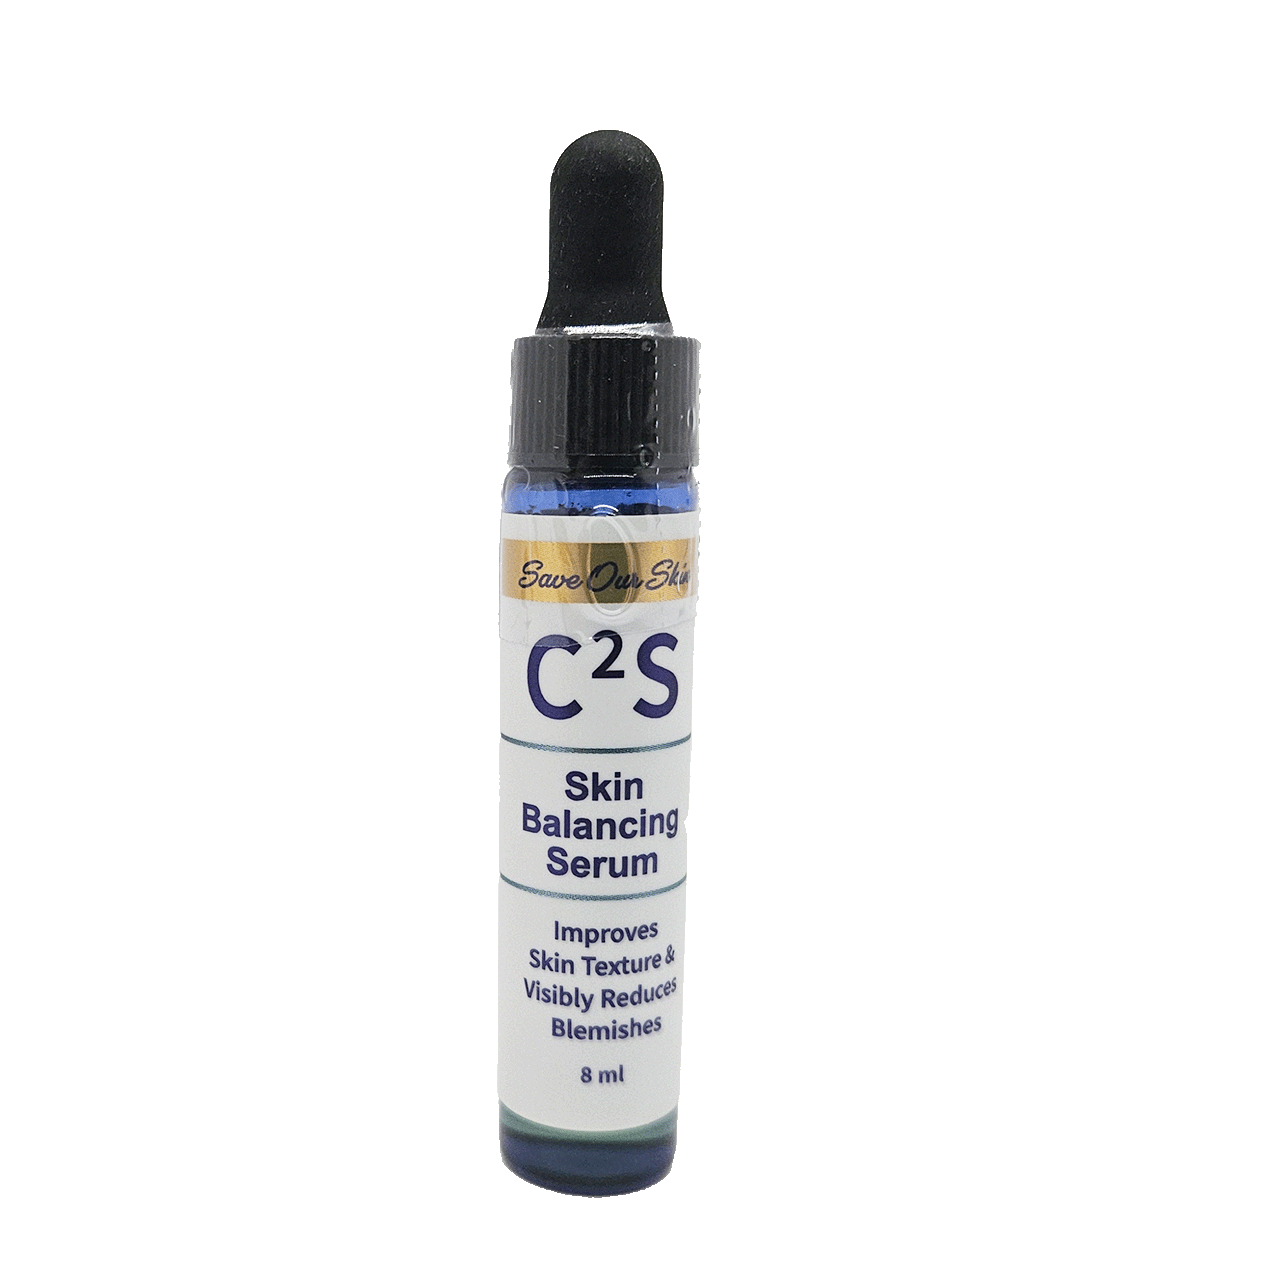 Save Our Skin C2S Skin Balancing Serum - Travel (Free with purchase of $59+)